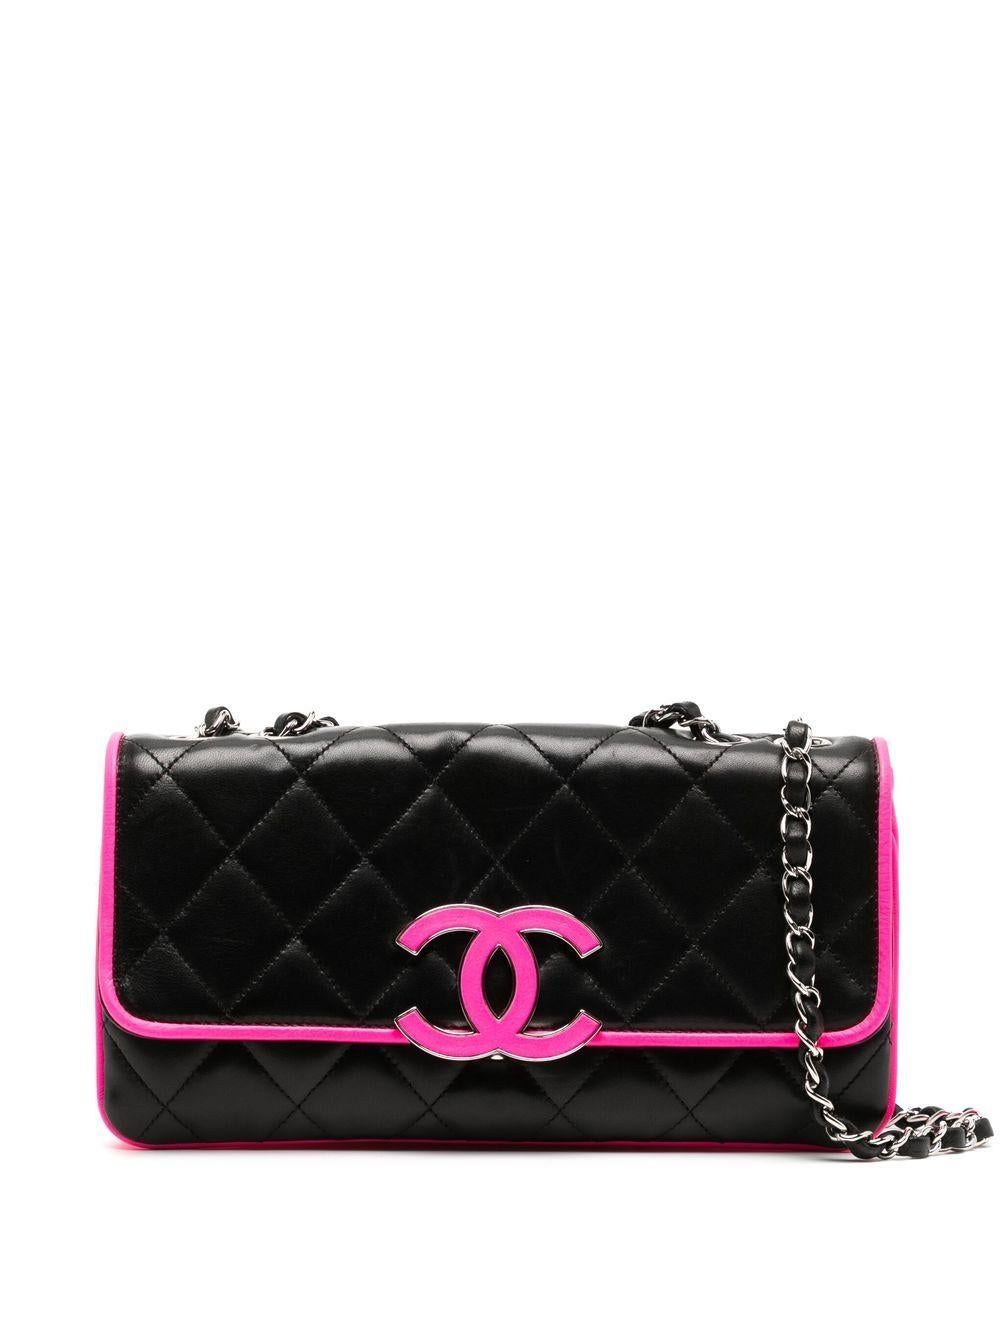 Chanel 2008 Cruise Black Pink Small Medium Logo Accordion Classic Flap Bag  For Sale 1